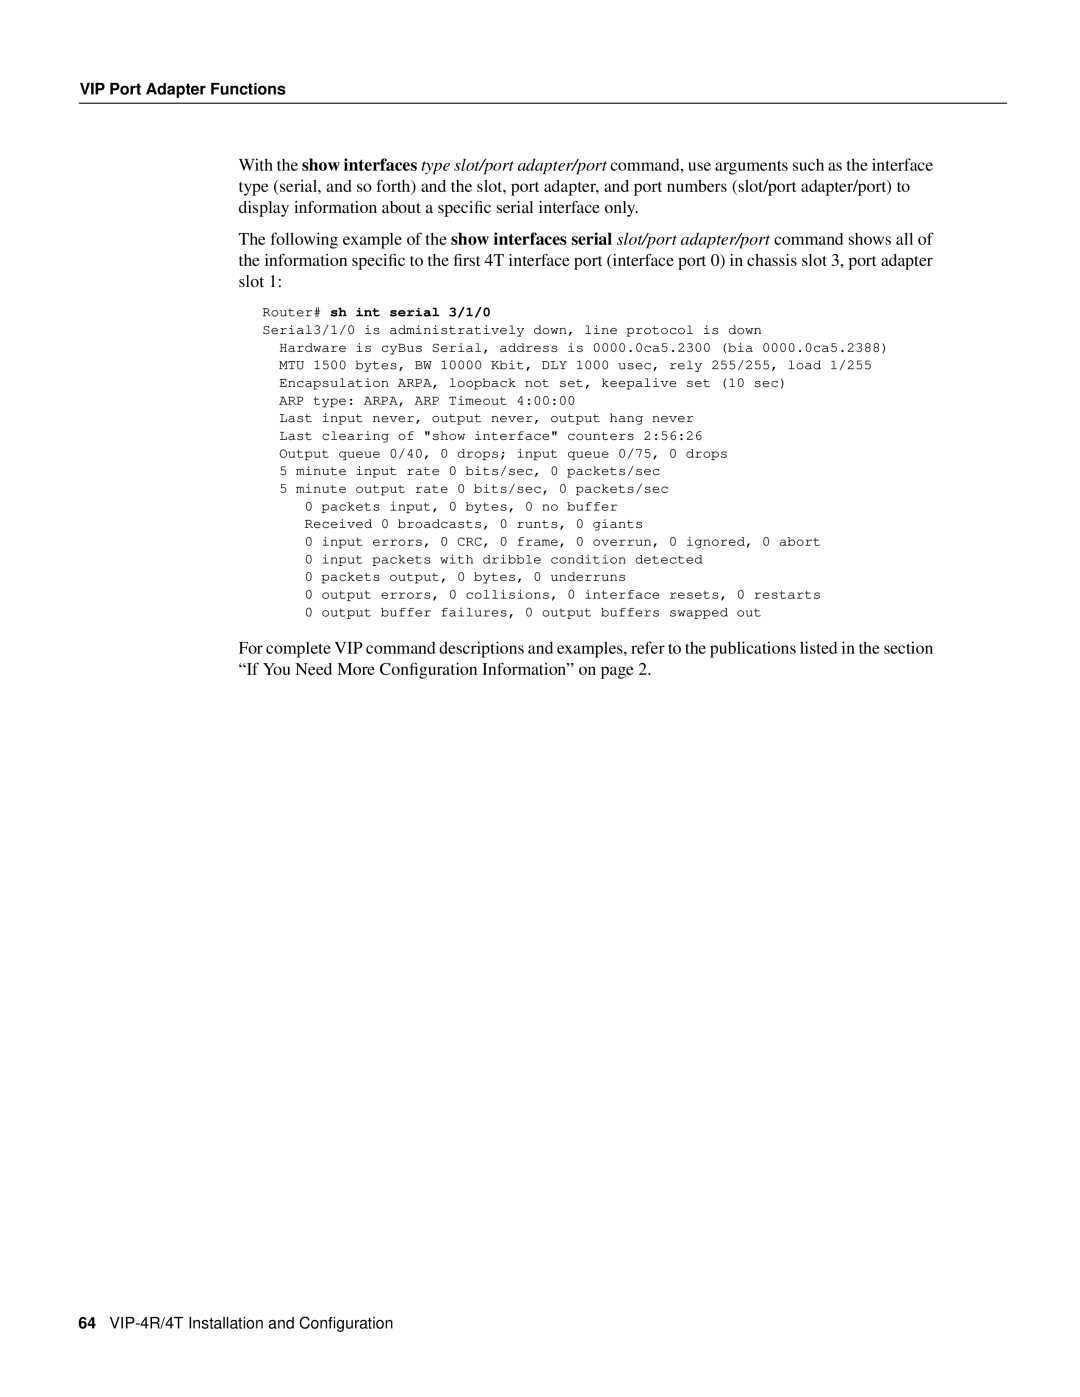 Cisco Systems manual VIP-4R/4T Installation and Conﬁguration 